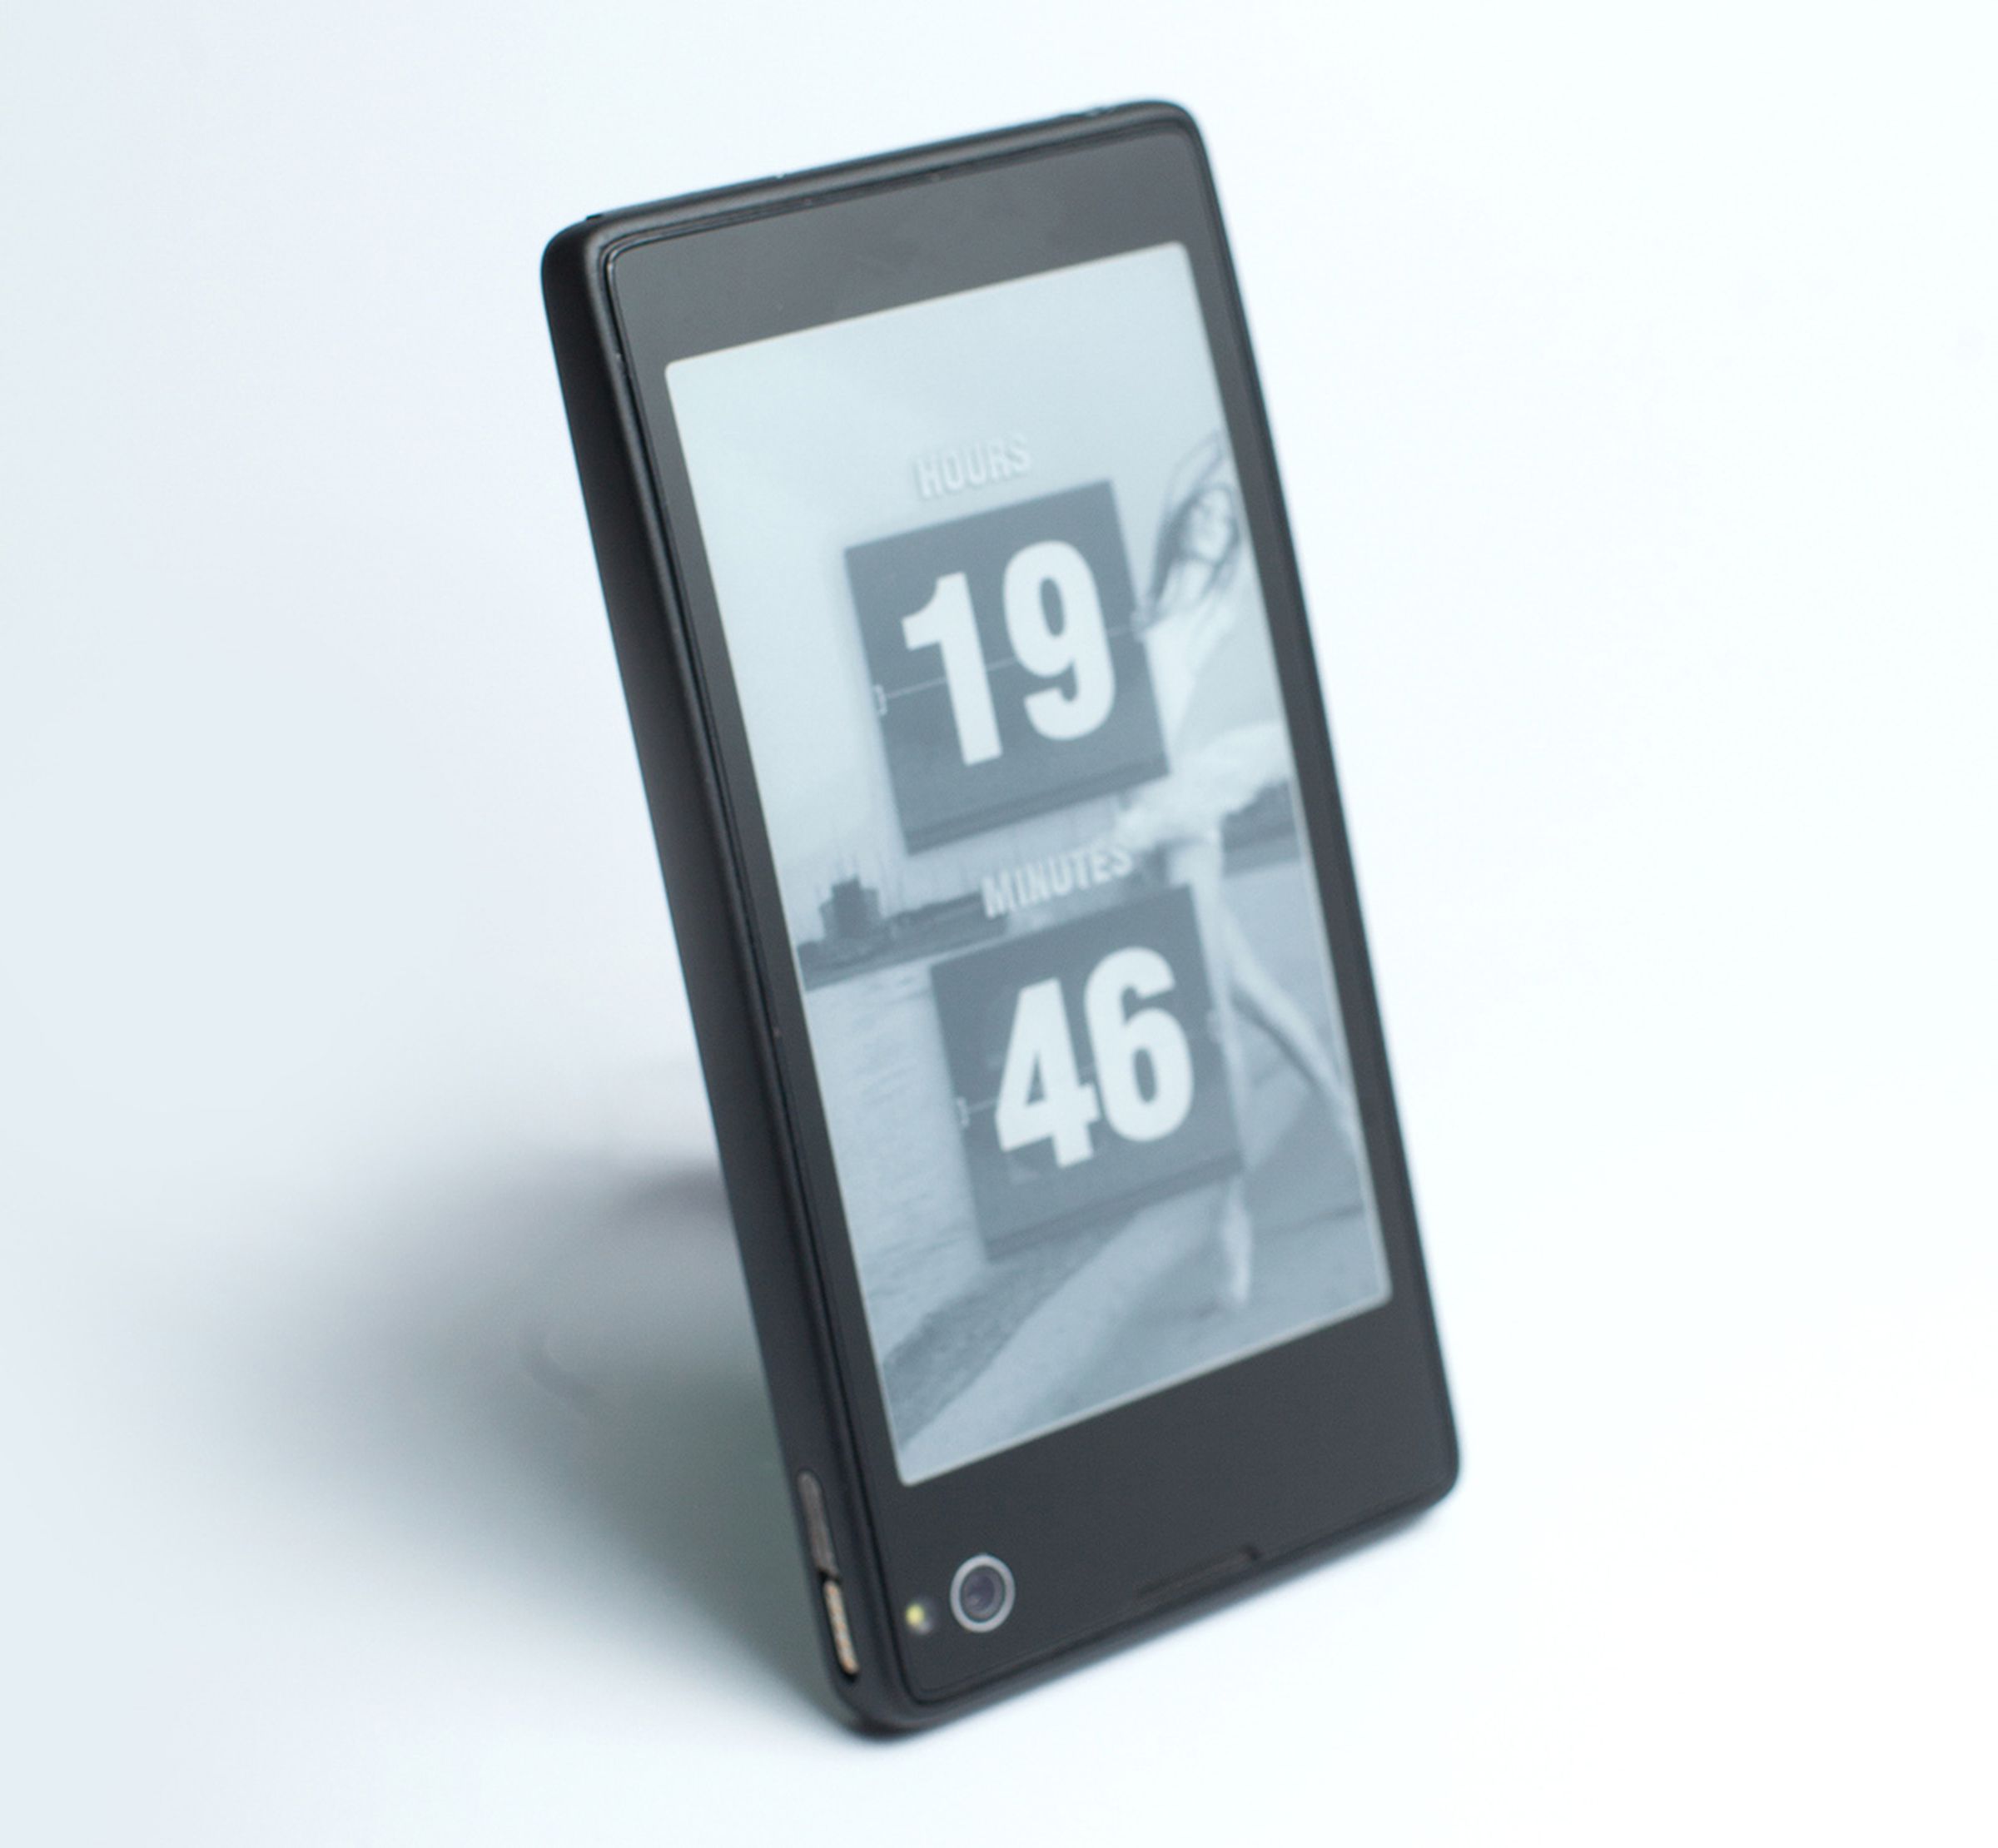 YotaPhone pictures